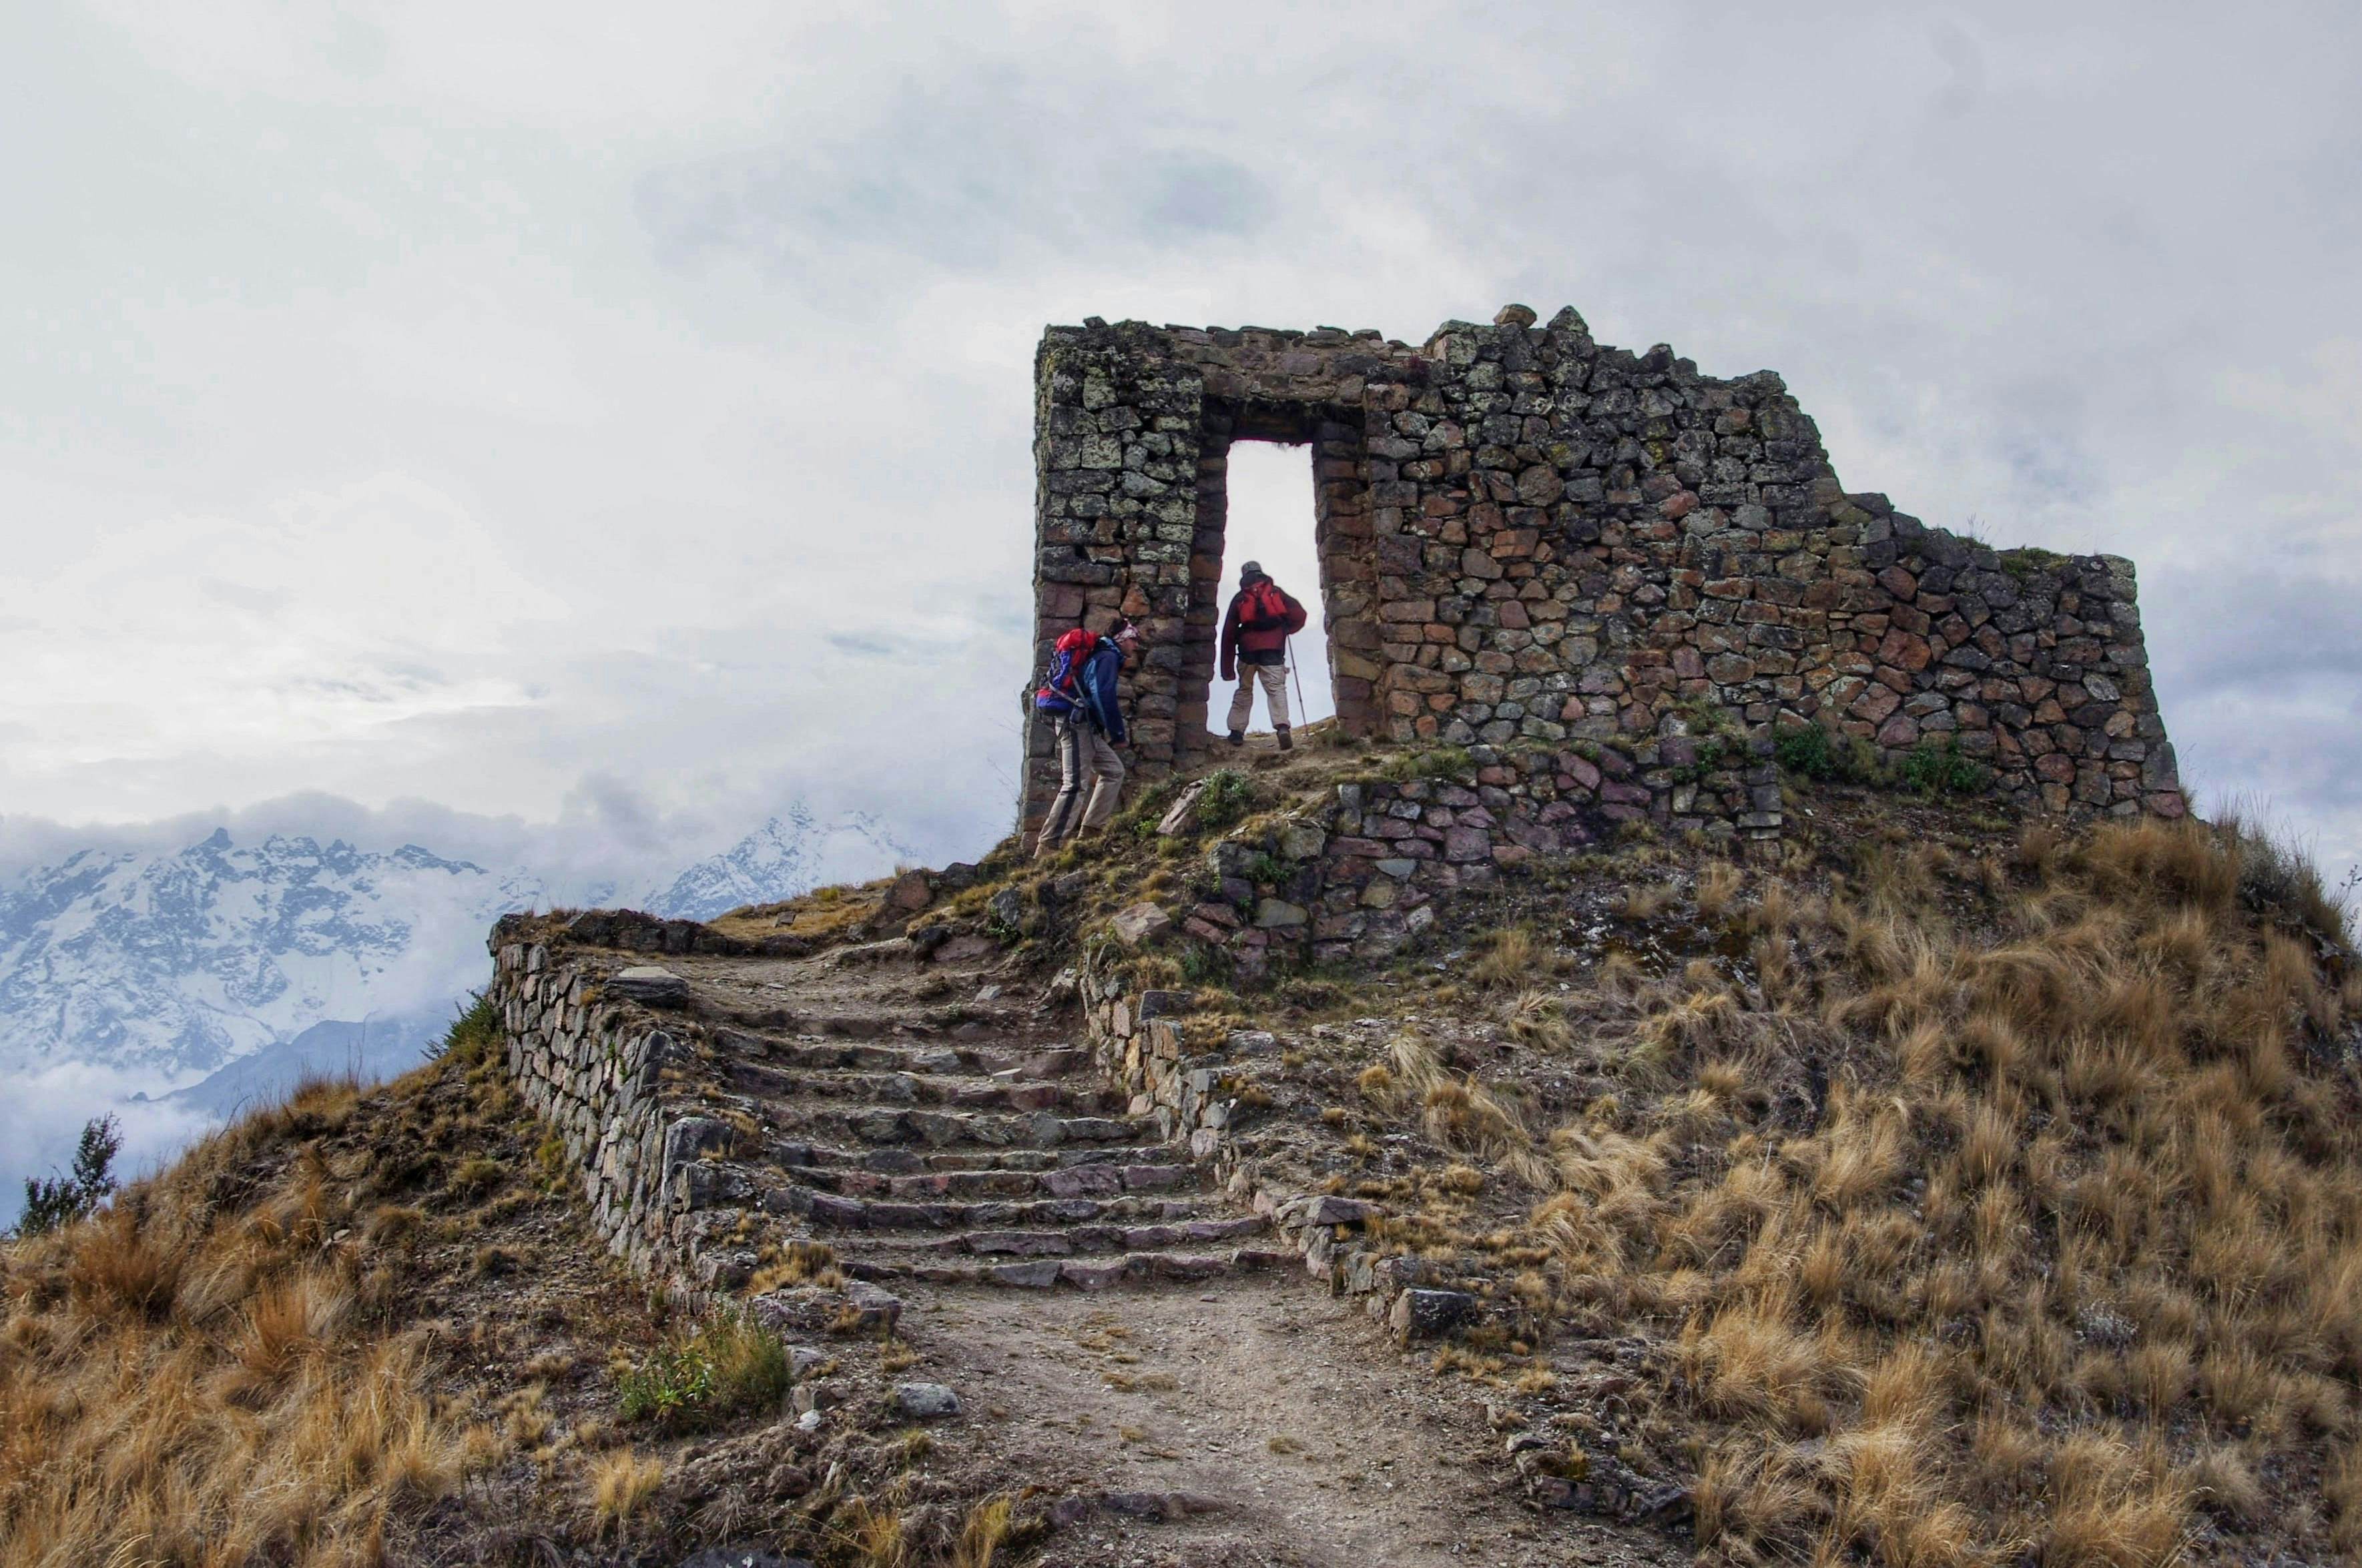 Inca Trail – Travel guide at Wikivoyage